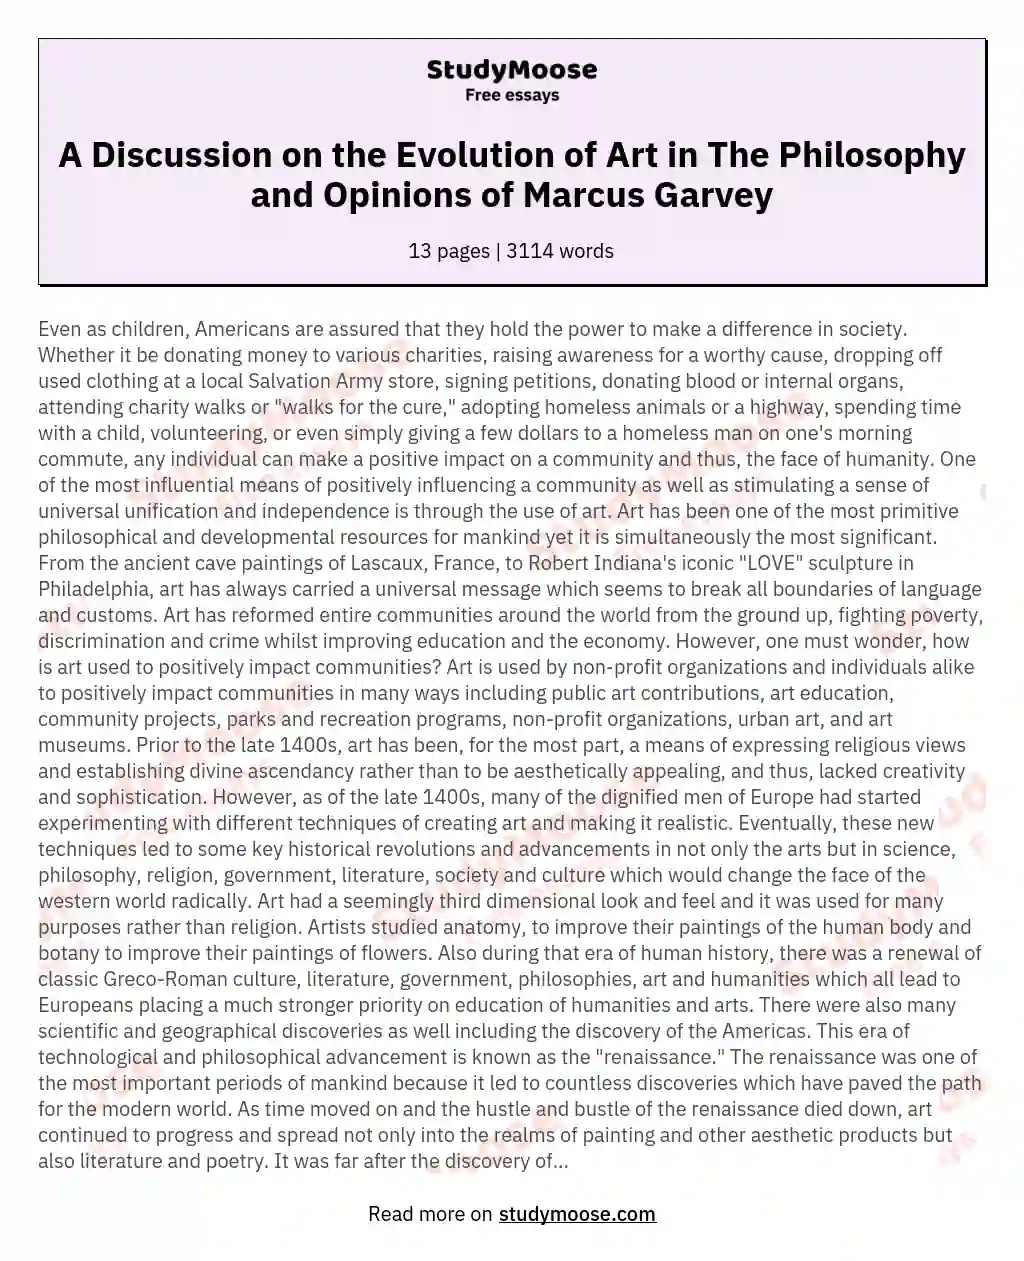 A Discussion on the Evolution of Art in The Philosophy and Opinions of Marcus Garvey essay